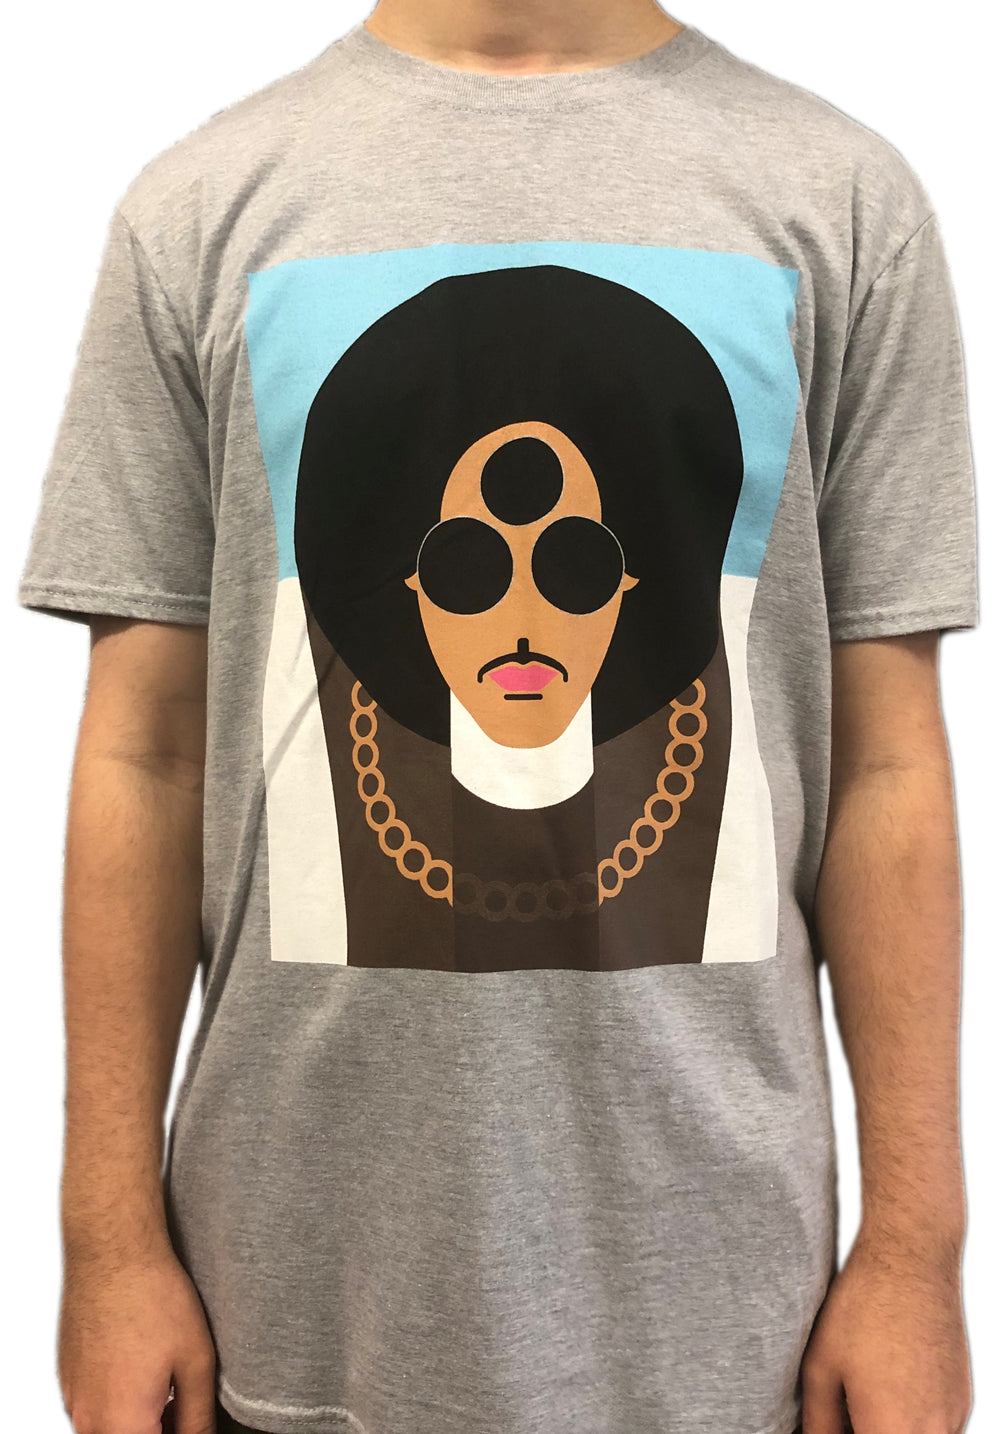 Prince – HITnRUN Album Front Cover Unisex Official T-Shirt NEW